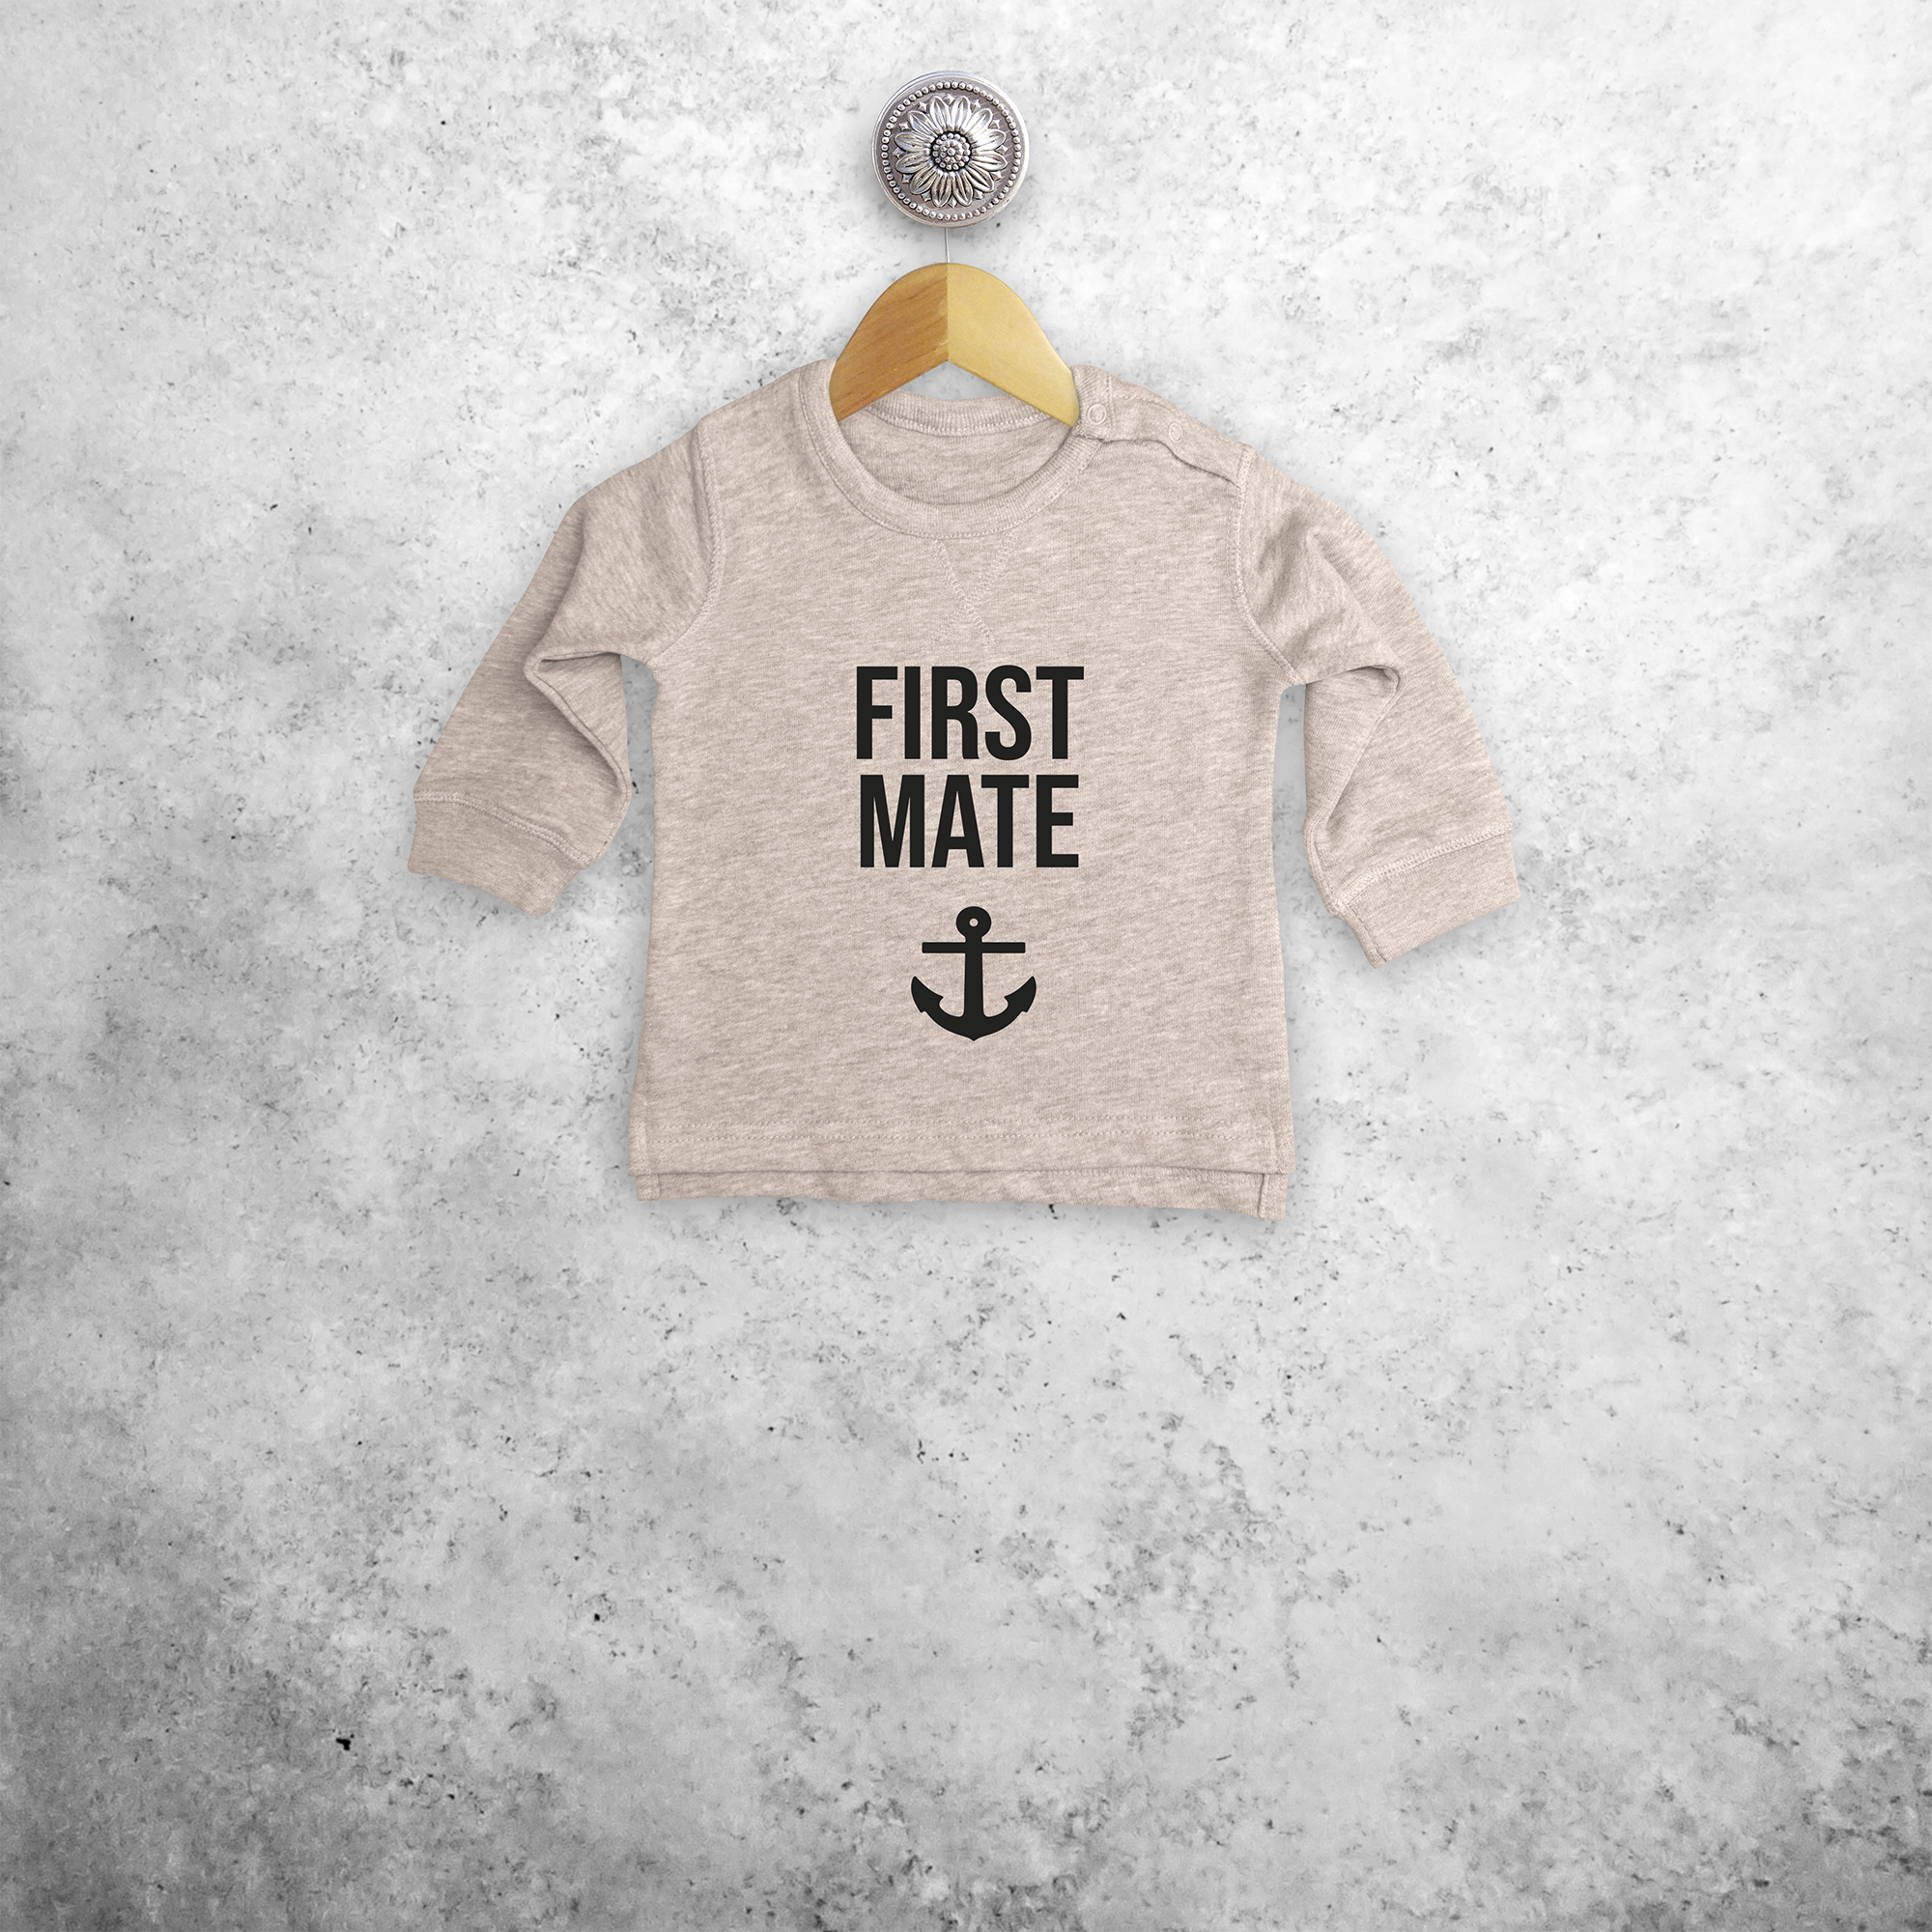 'First mate' baby sweater